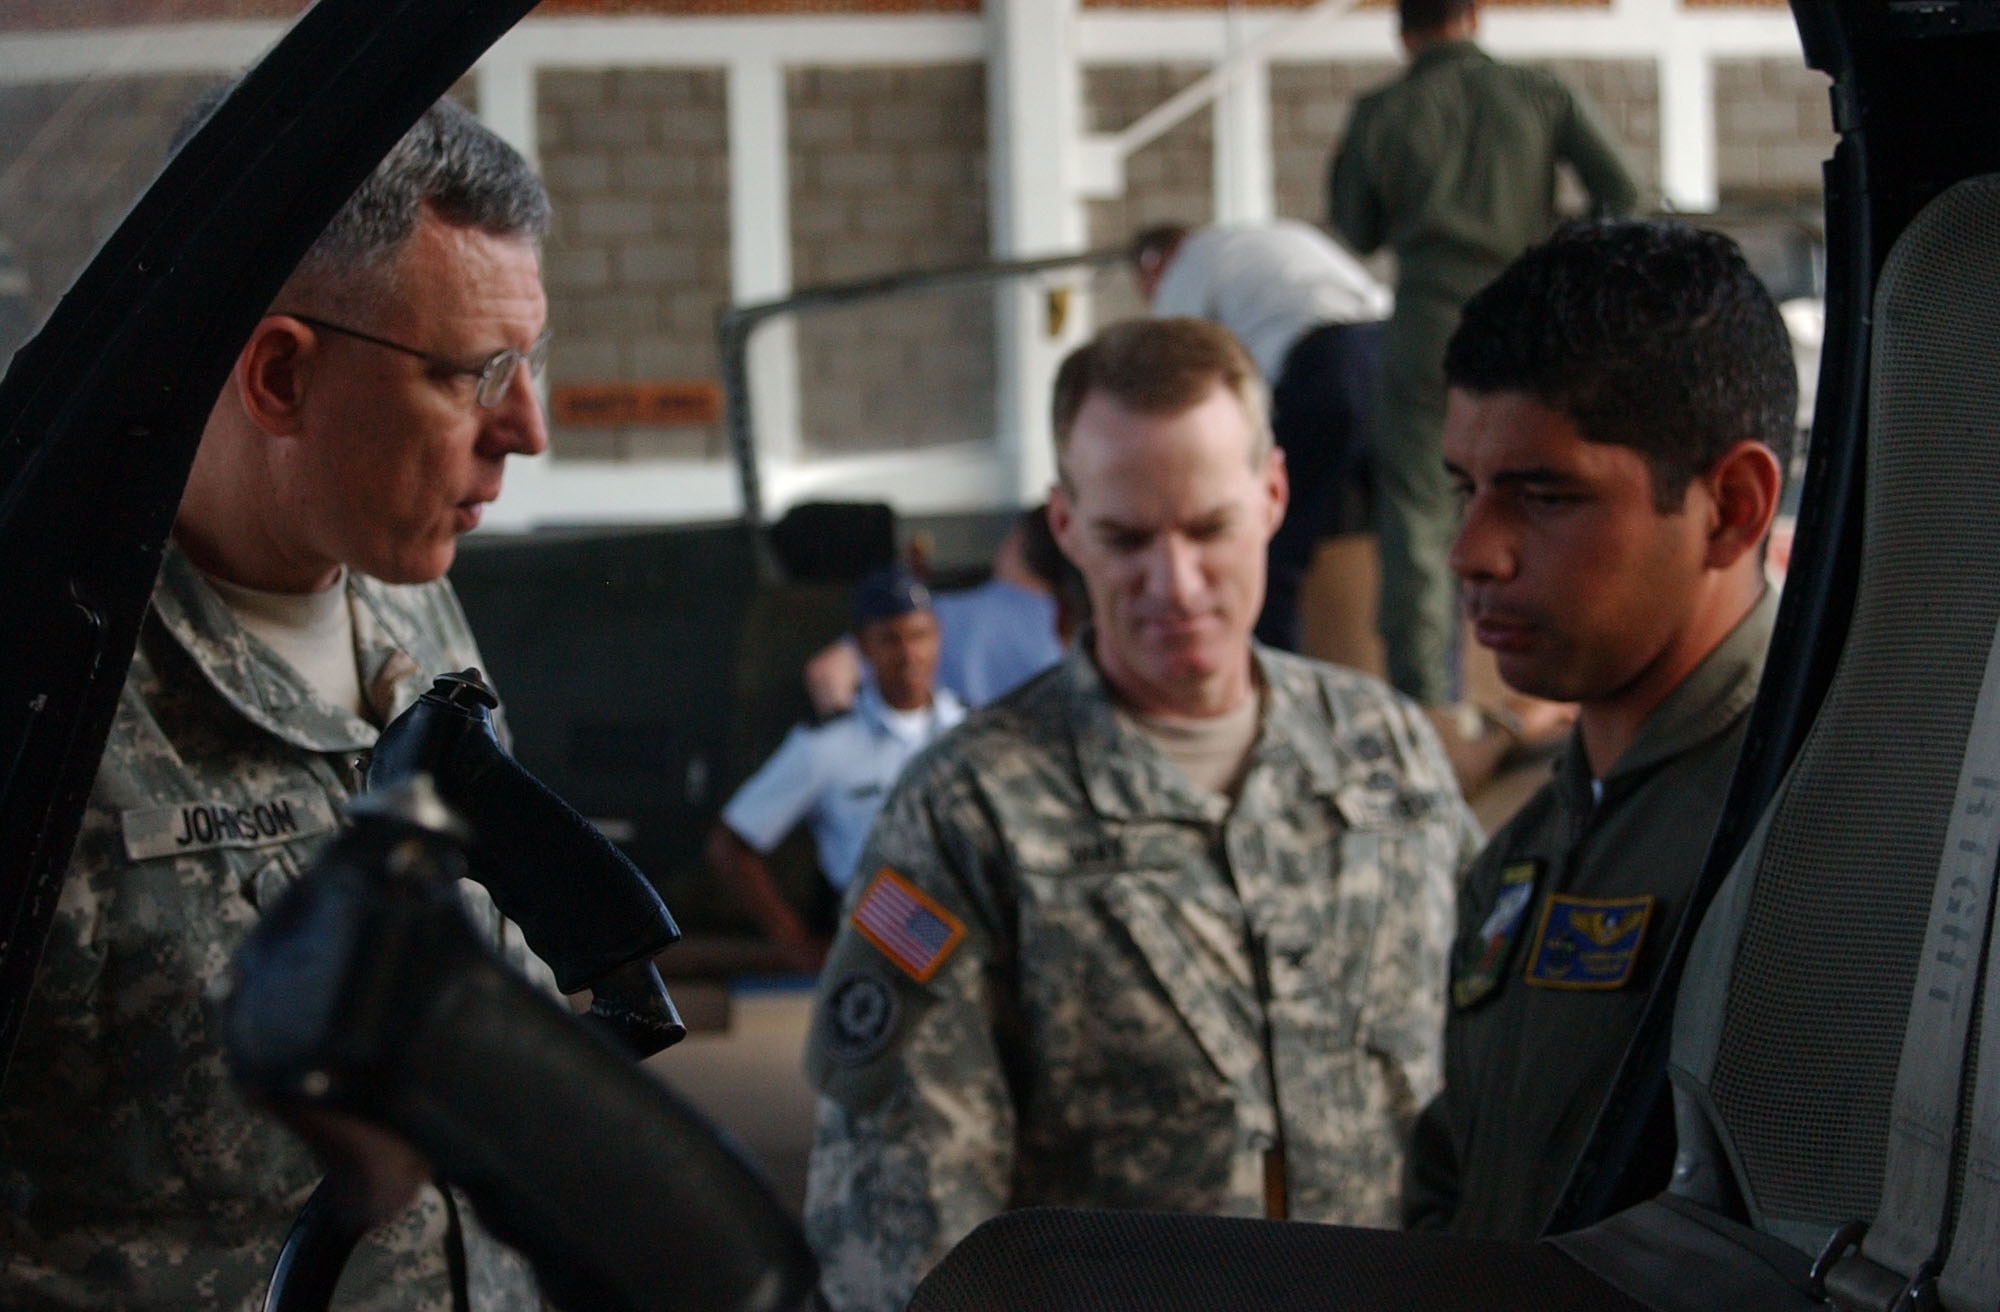 Army Brig. Gen. John Johnson, a Capstone participant, is given an overview of the Honduran air force Academy's aircraft by Honduran 2nd Lt. Rolando Rzunga Bode, during a visit to Soto Cano Air Base, Honduras. Capstone participants traveled throughout the U.S. Southern Command's Area of Responsbility. At each stop, particpants met with U.S. Ebassy members as well as foreign political and military leadership. U.S. Air Force photo by Senior Airman Shaun Emery.        